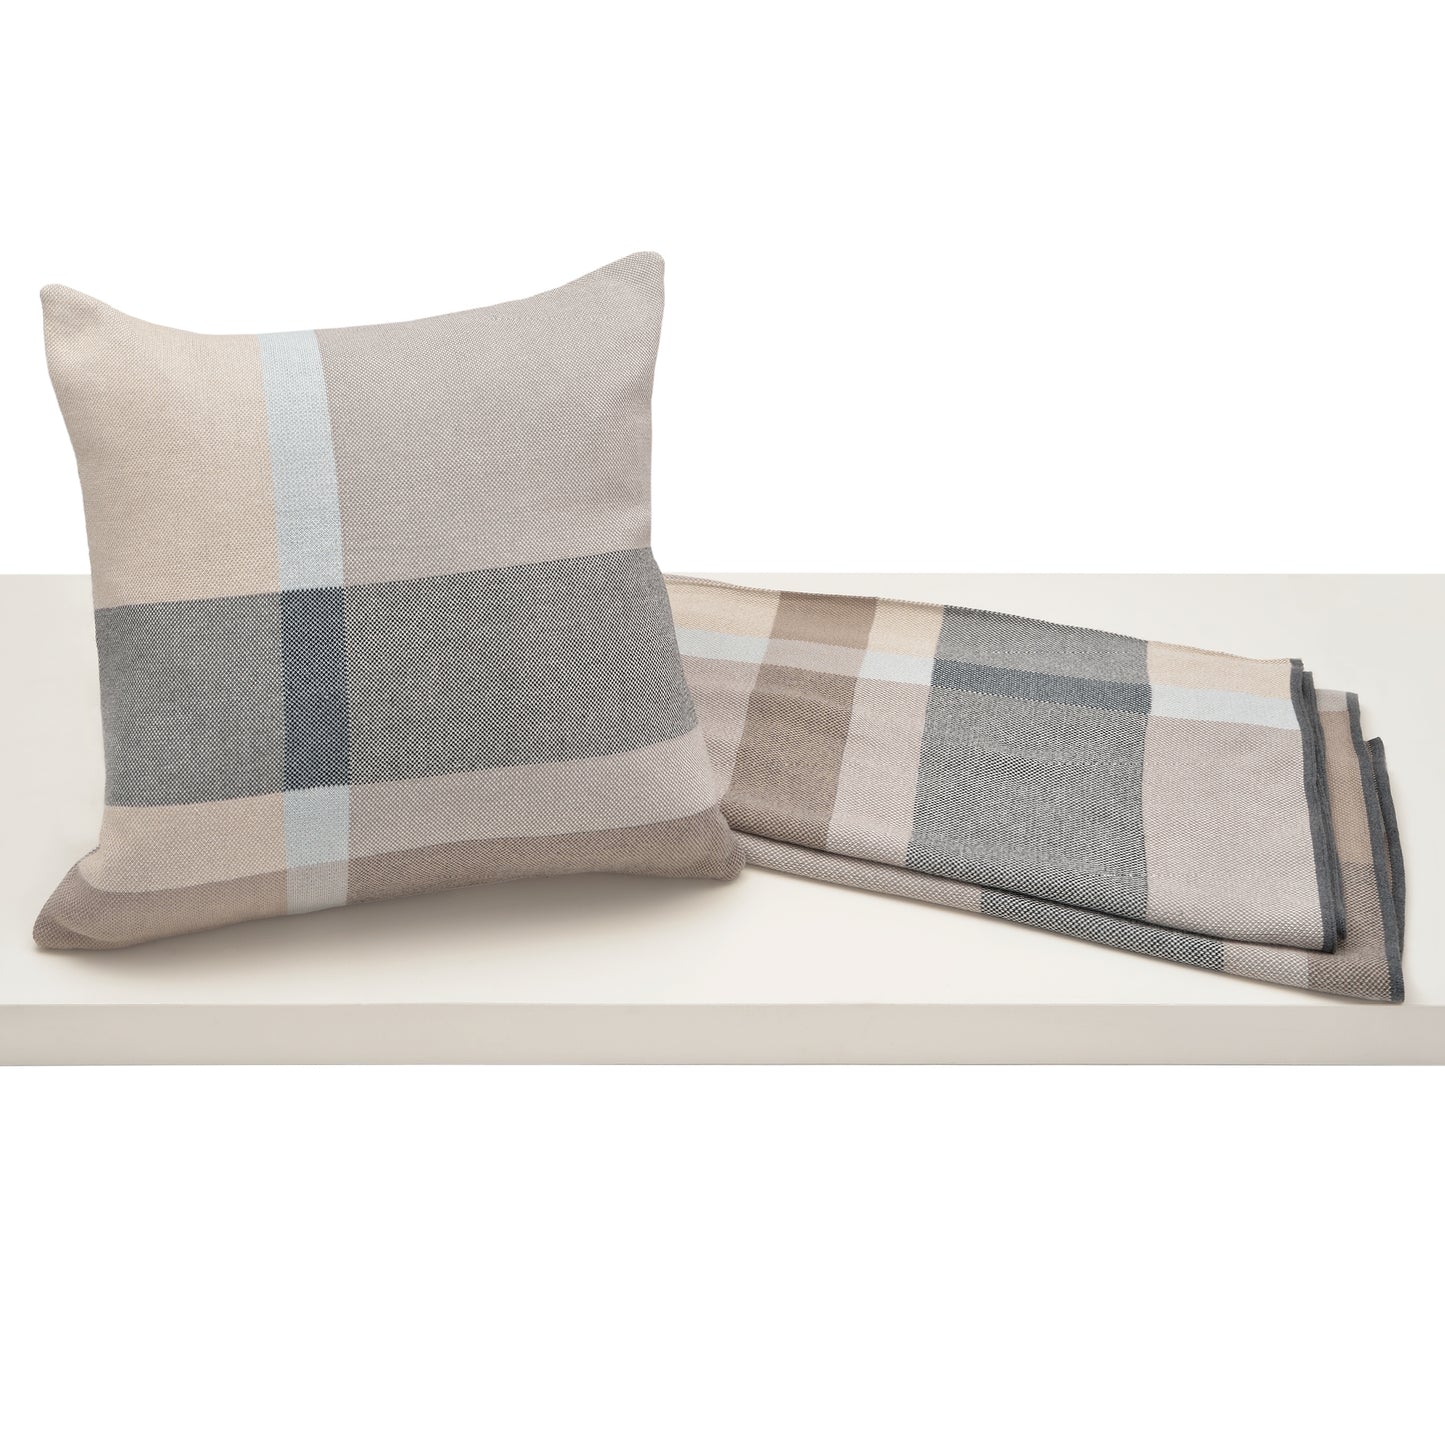 Rory Plaid Pillow - Beige